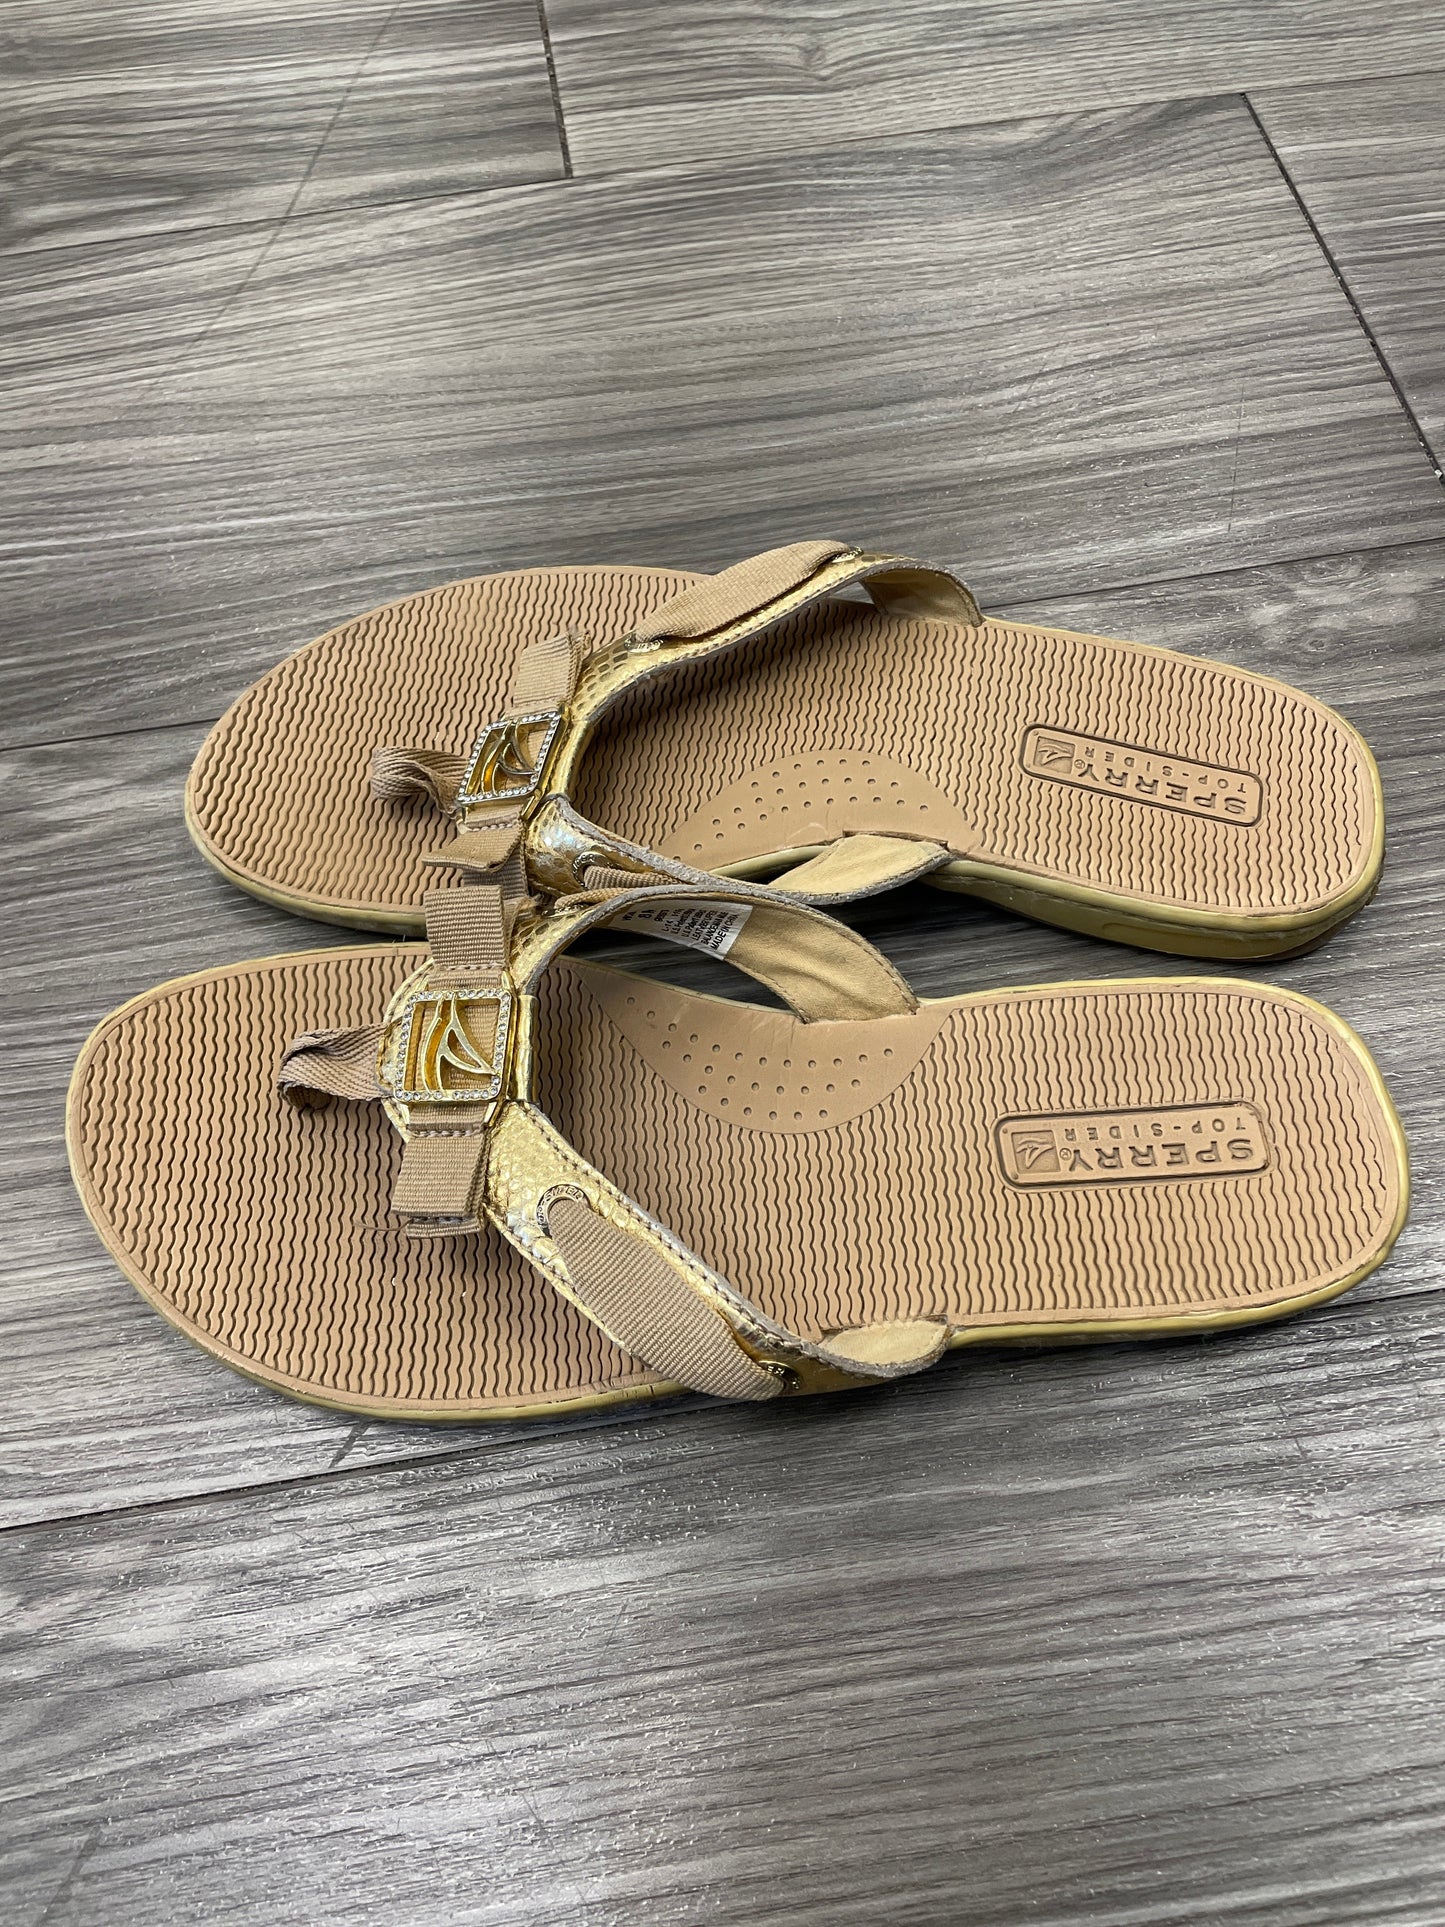 Sandals Flip Flops By Sperry  Size: 8